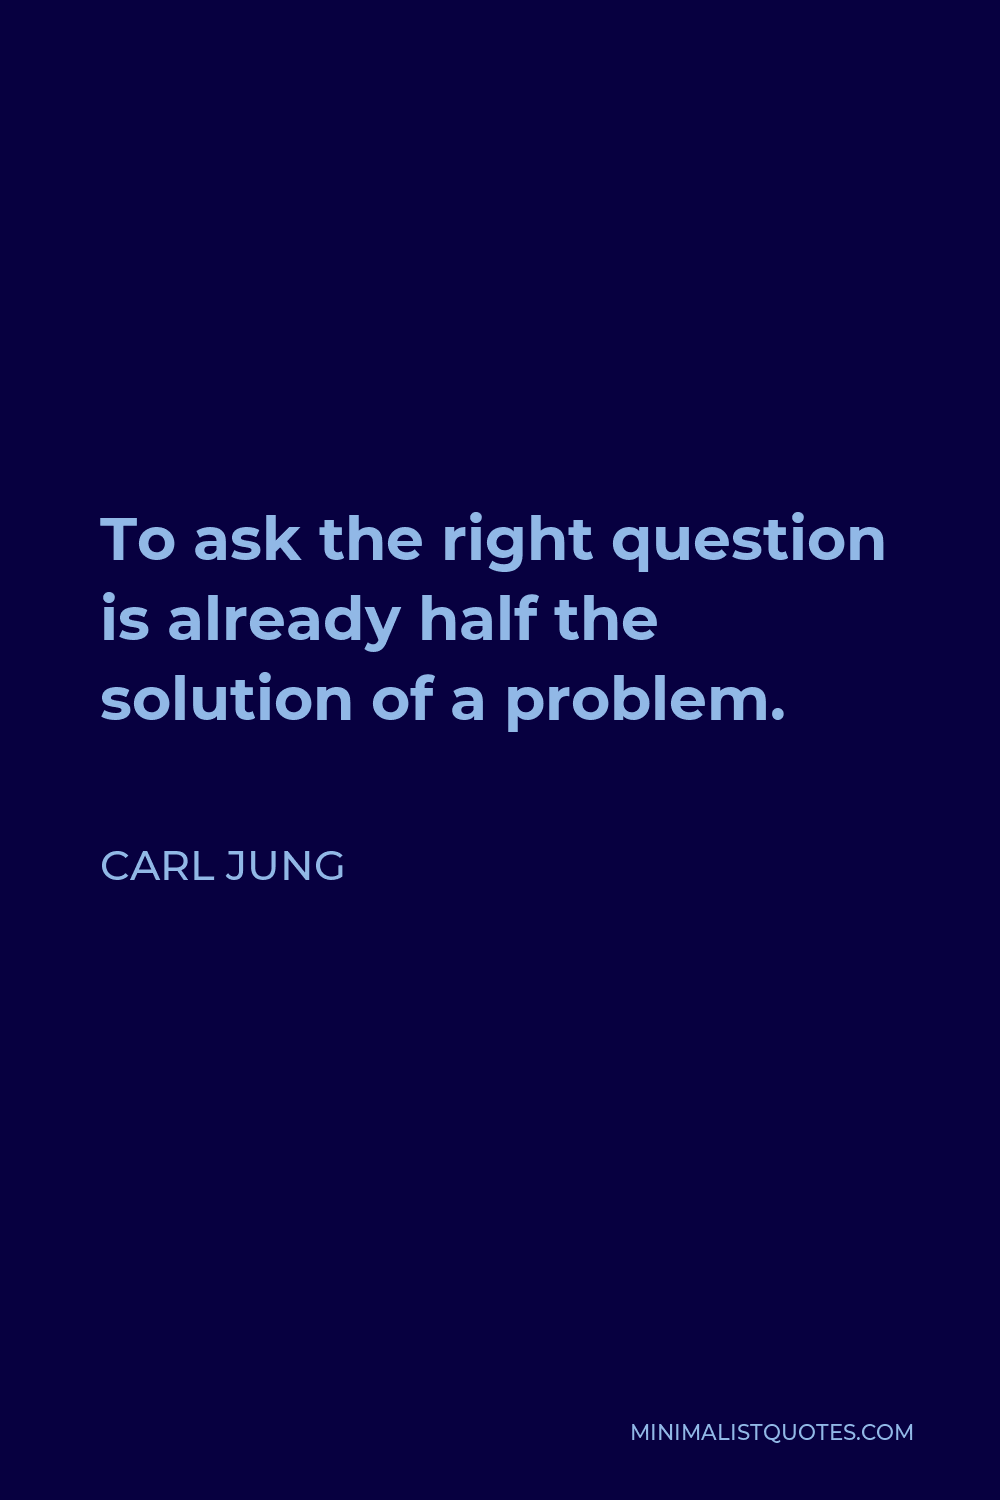 Carl Jung Quote - To ask the right question is already half the solution of a problem.